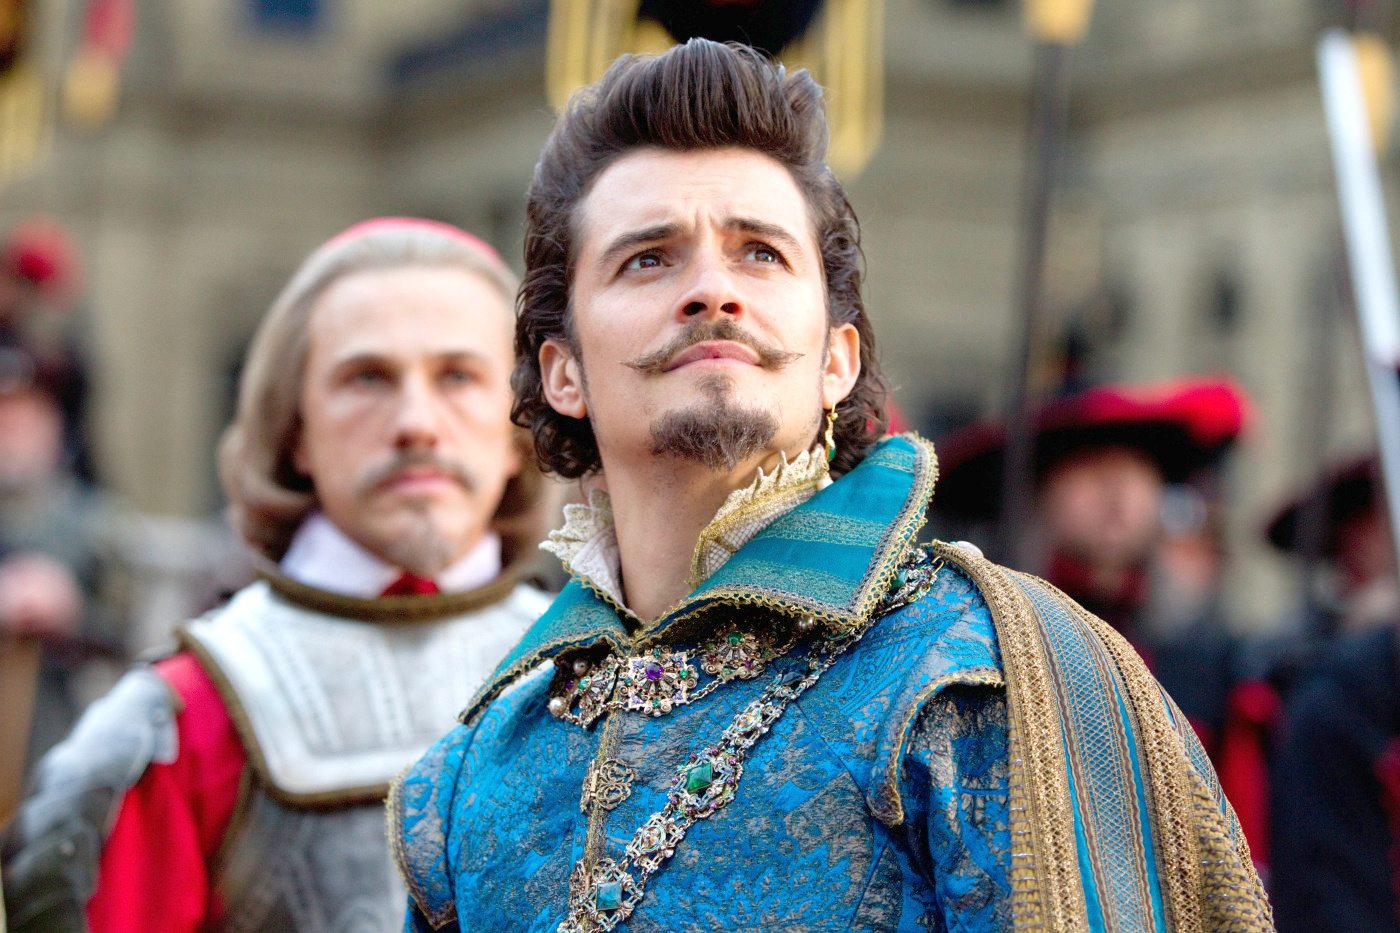 Orlando Bloom stars as Duke of Buckingham and Christoph Waltz stars as Cardinal Richelieu in Summit Entertainment's The Three Musketeers (2011)